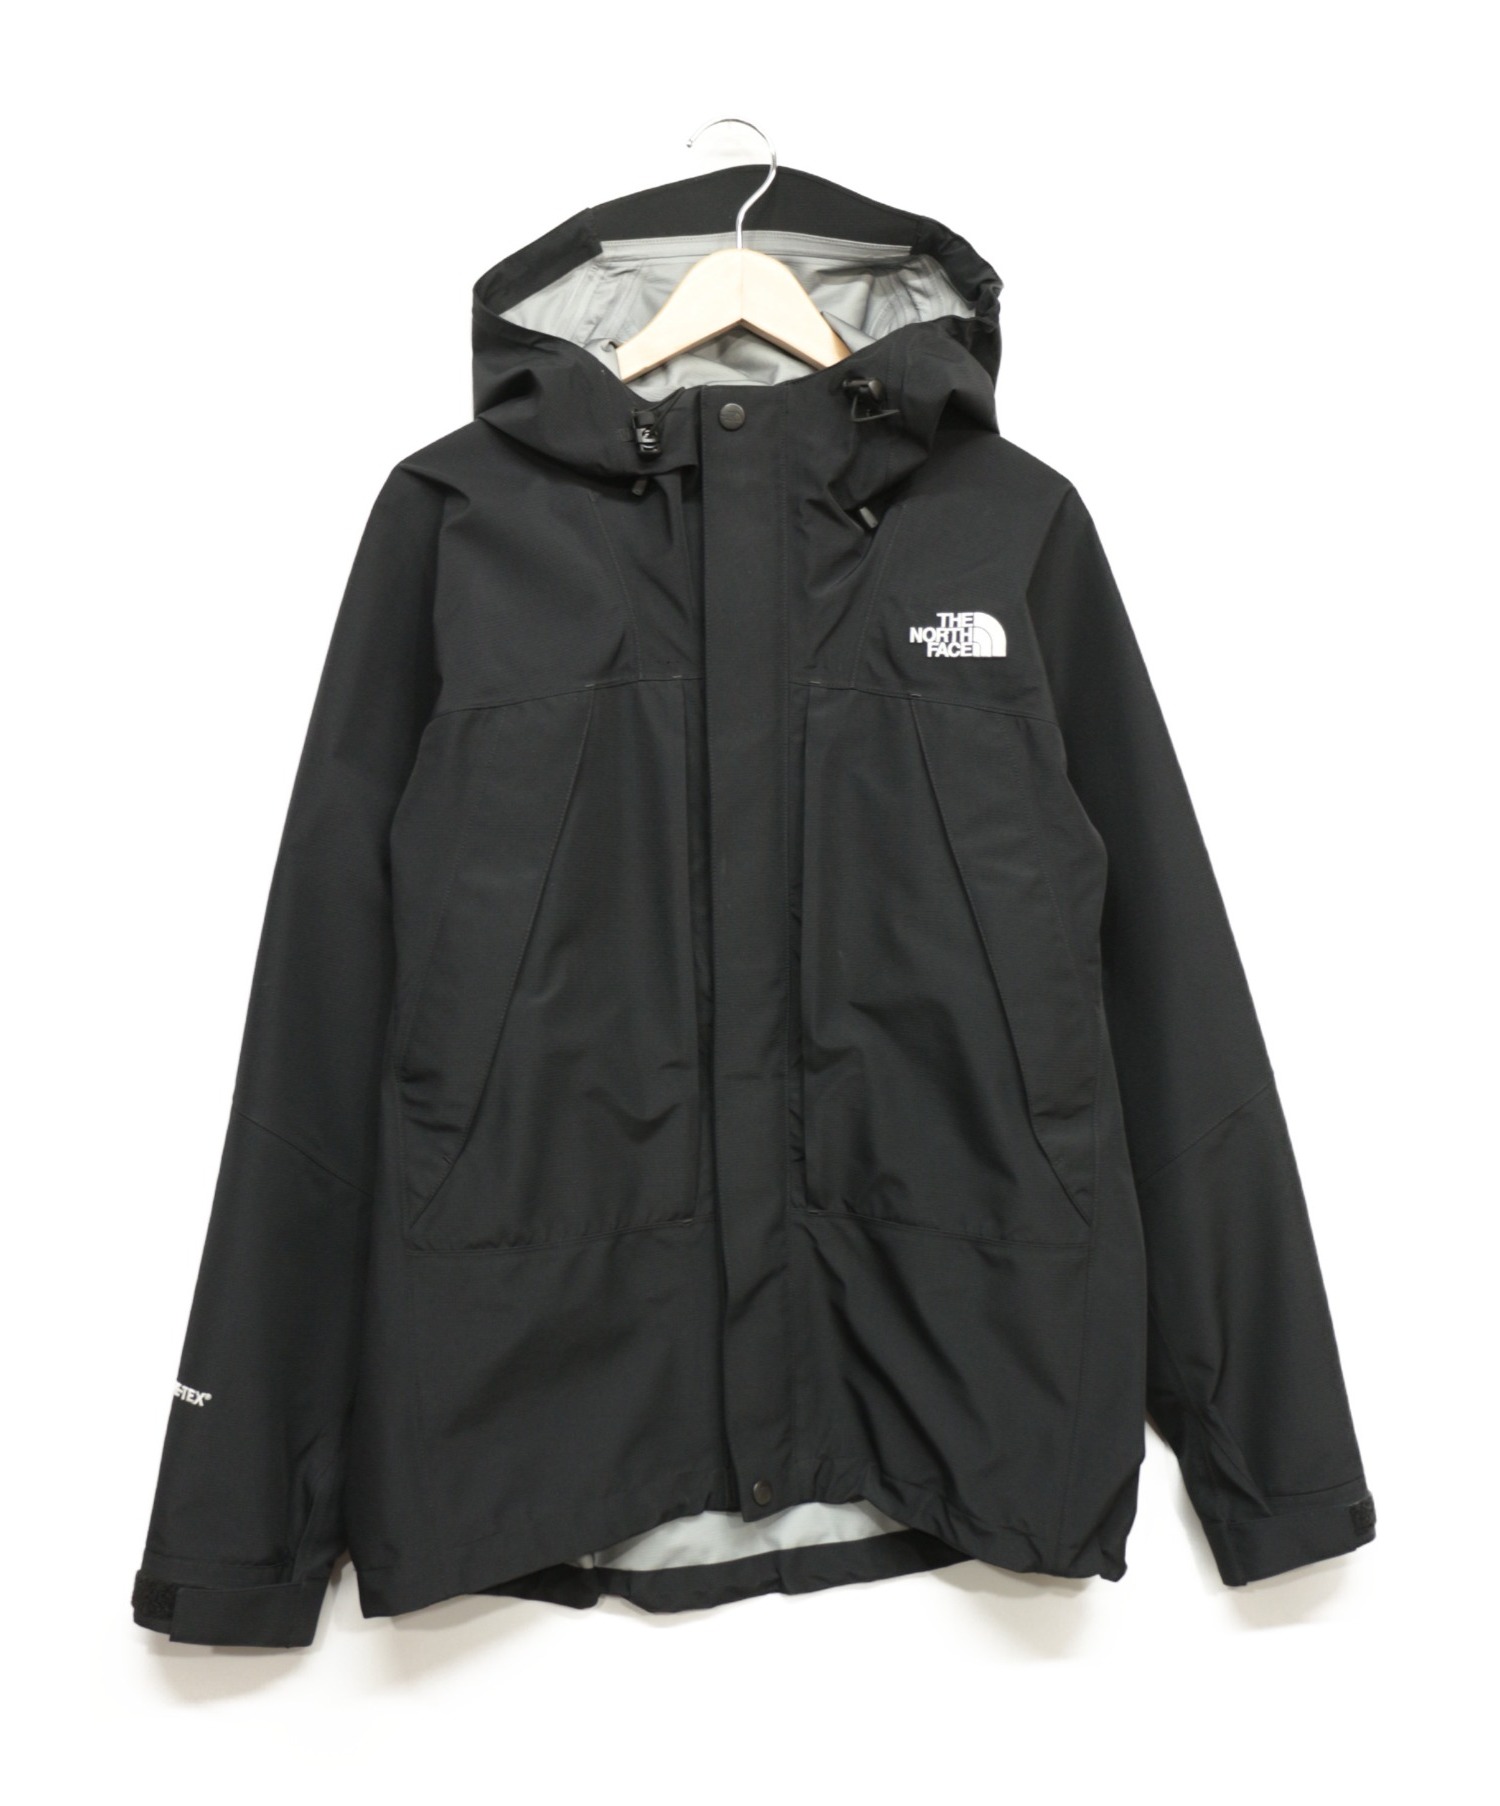 north face all mountain jacket